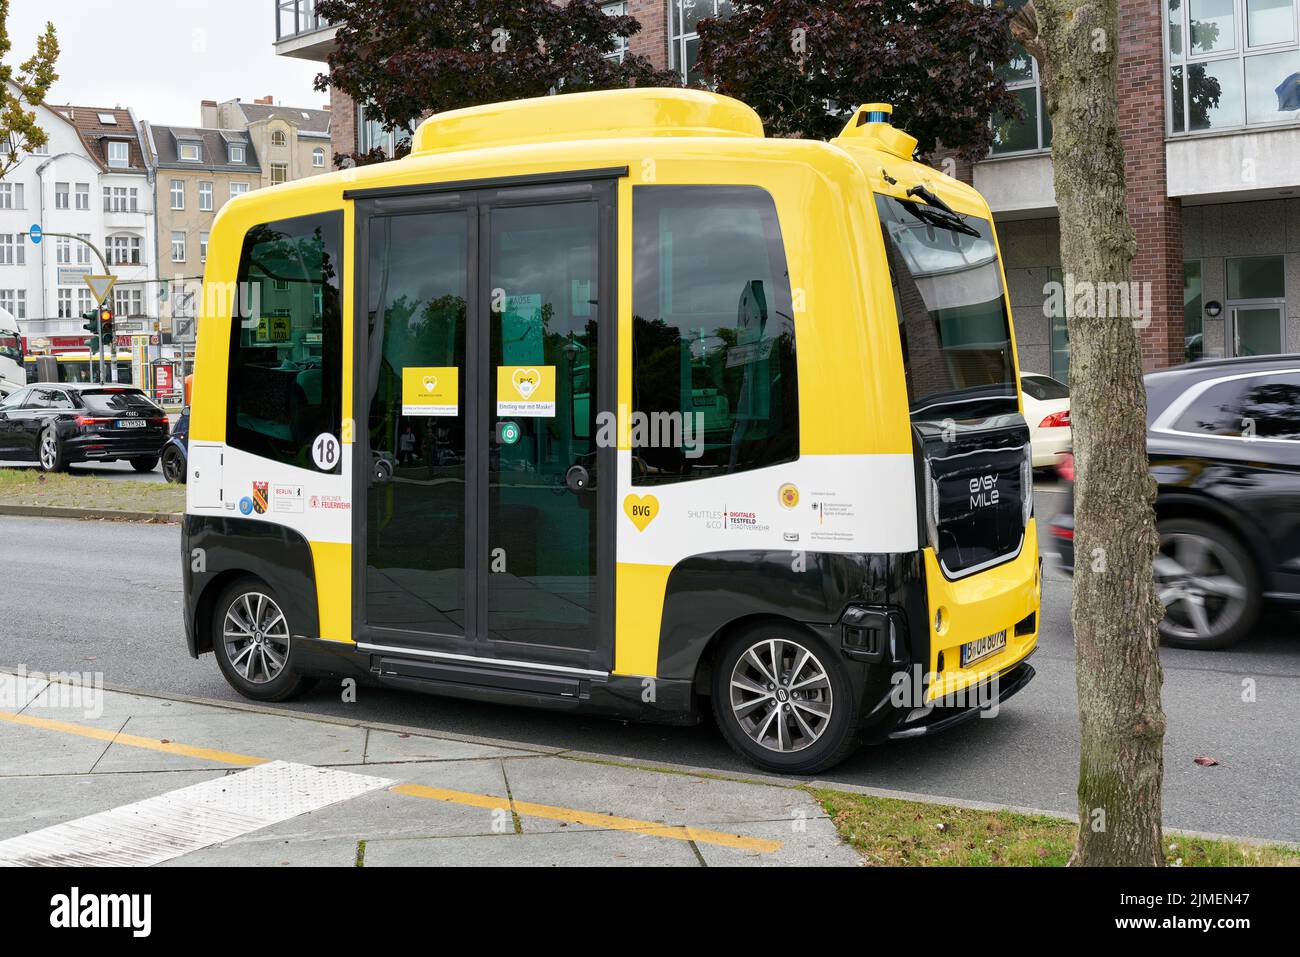 Self-driving autonomous bus as a project of BVG (Berliner Verkehrsbetriebe) in the test phase Stock Photo